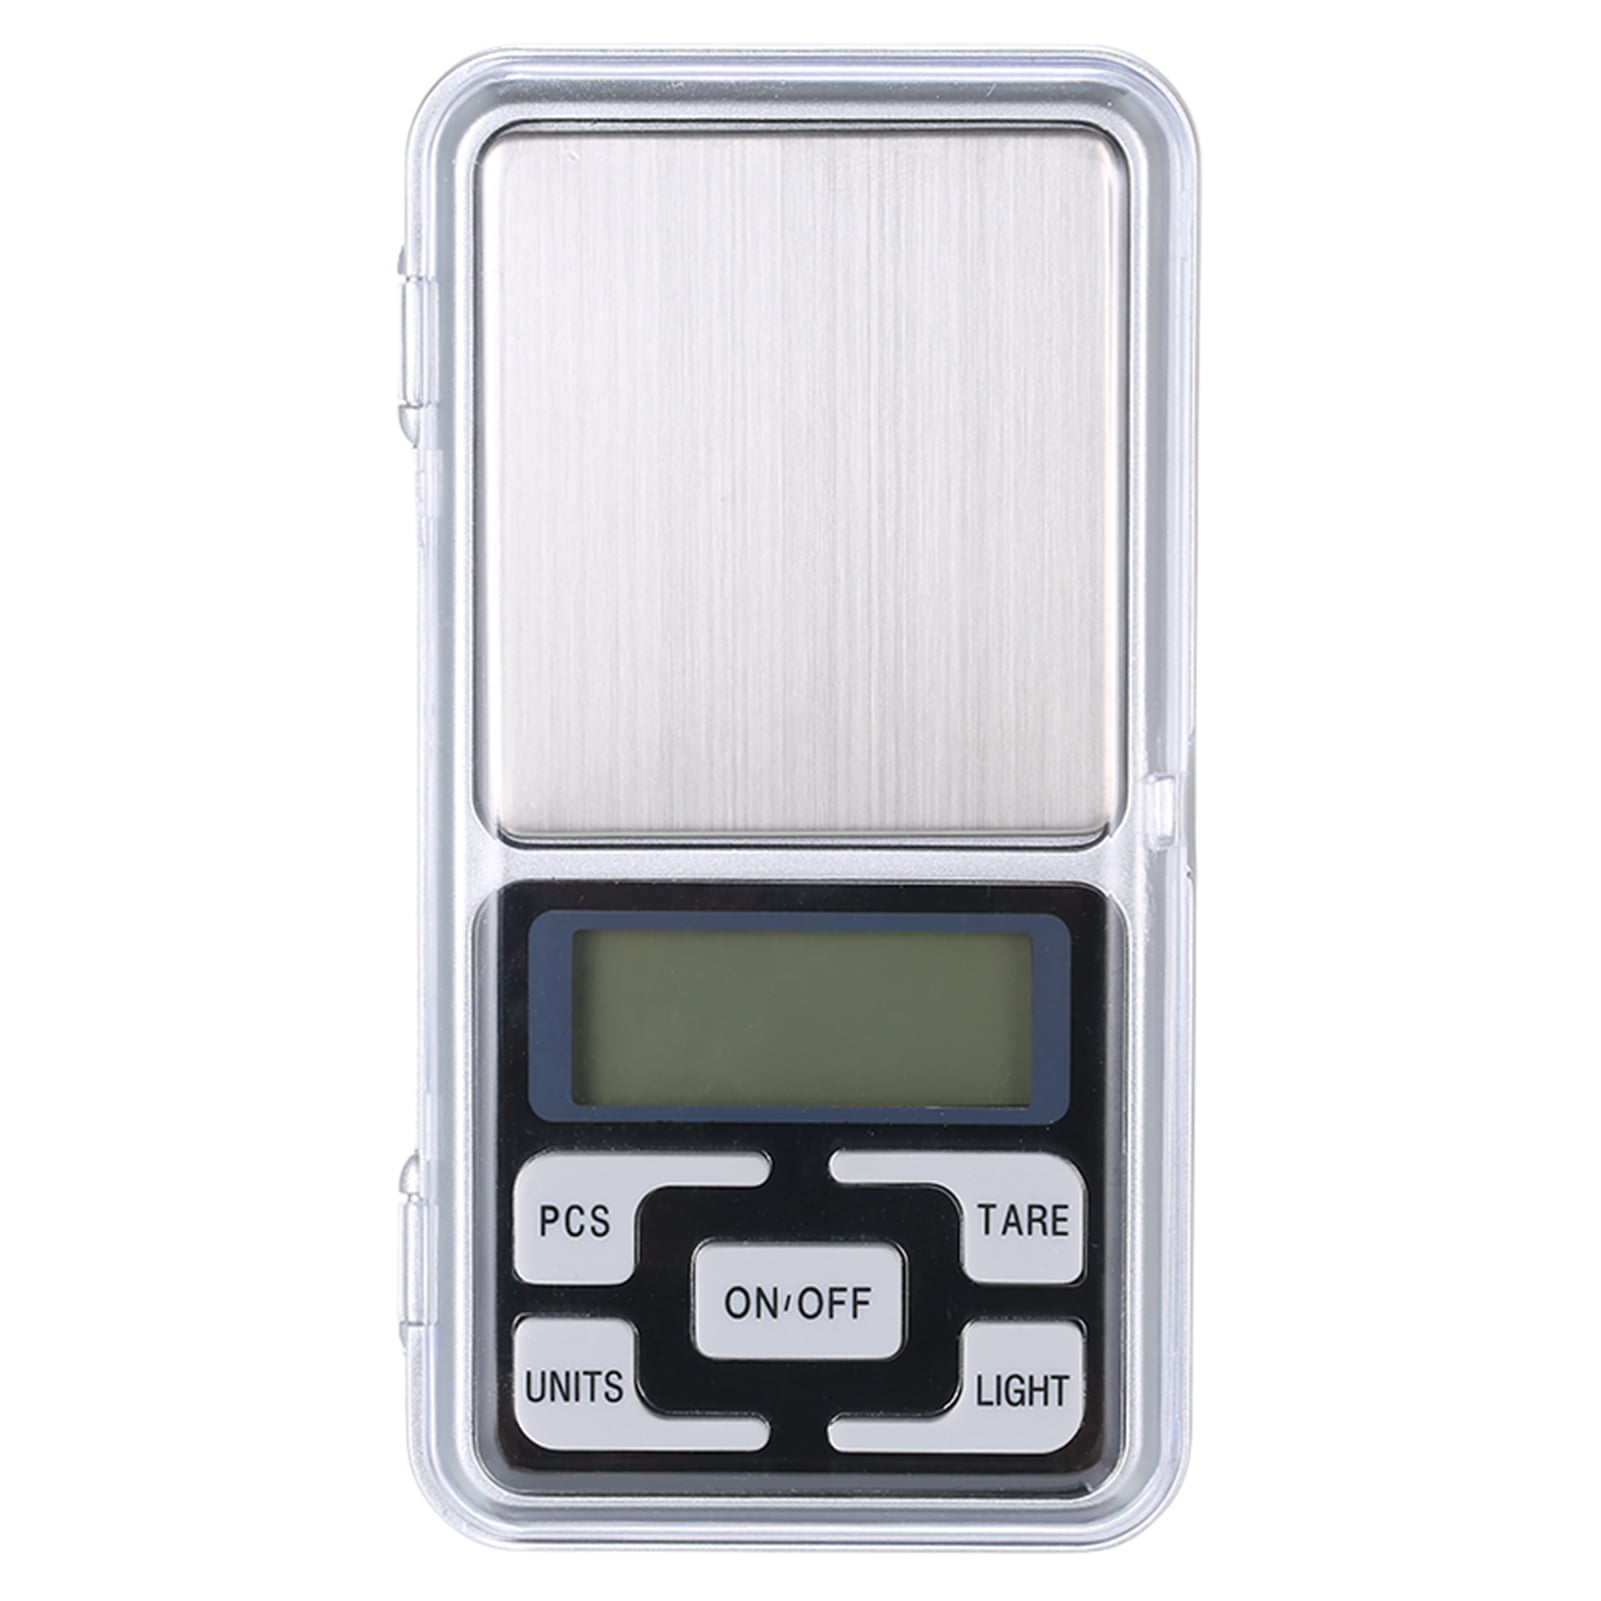 Pocket Digital Scales Jewellery Gold Weighing Mini Electronic LCD 0.01g/200g 